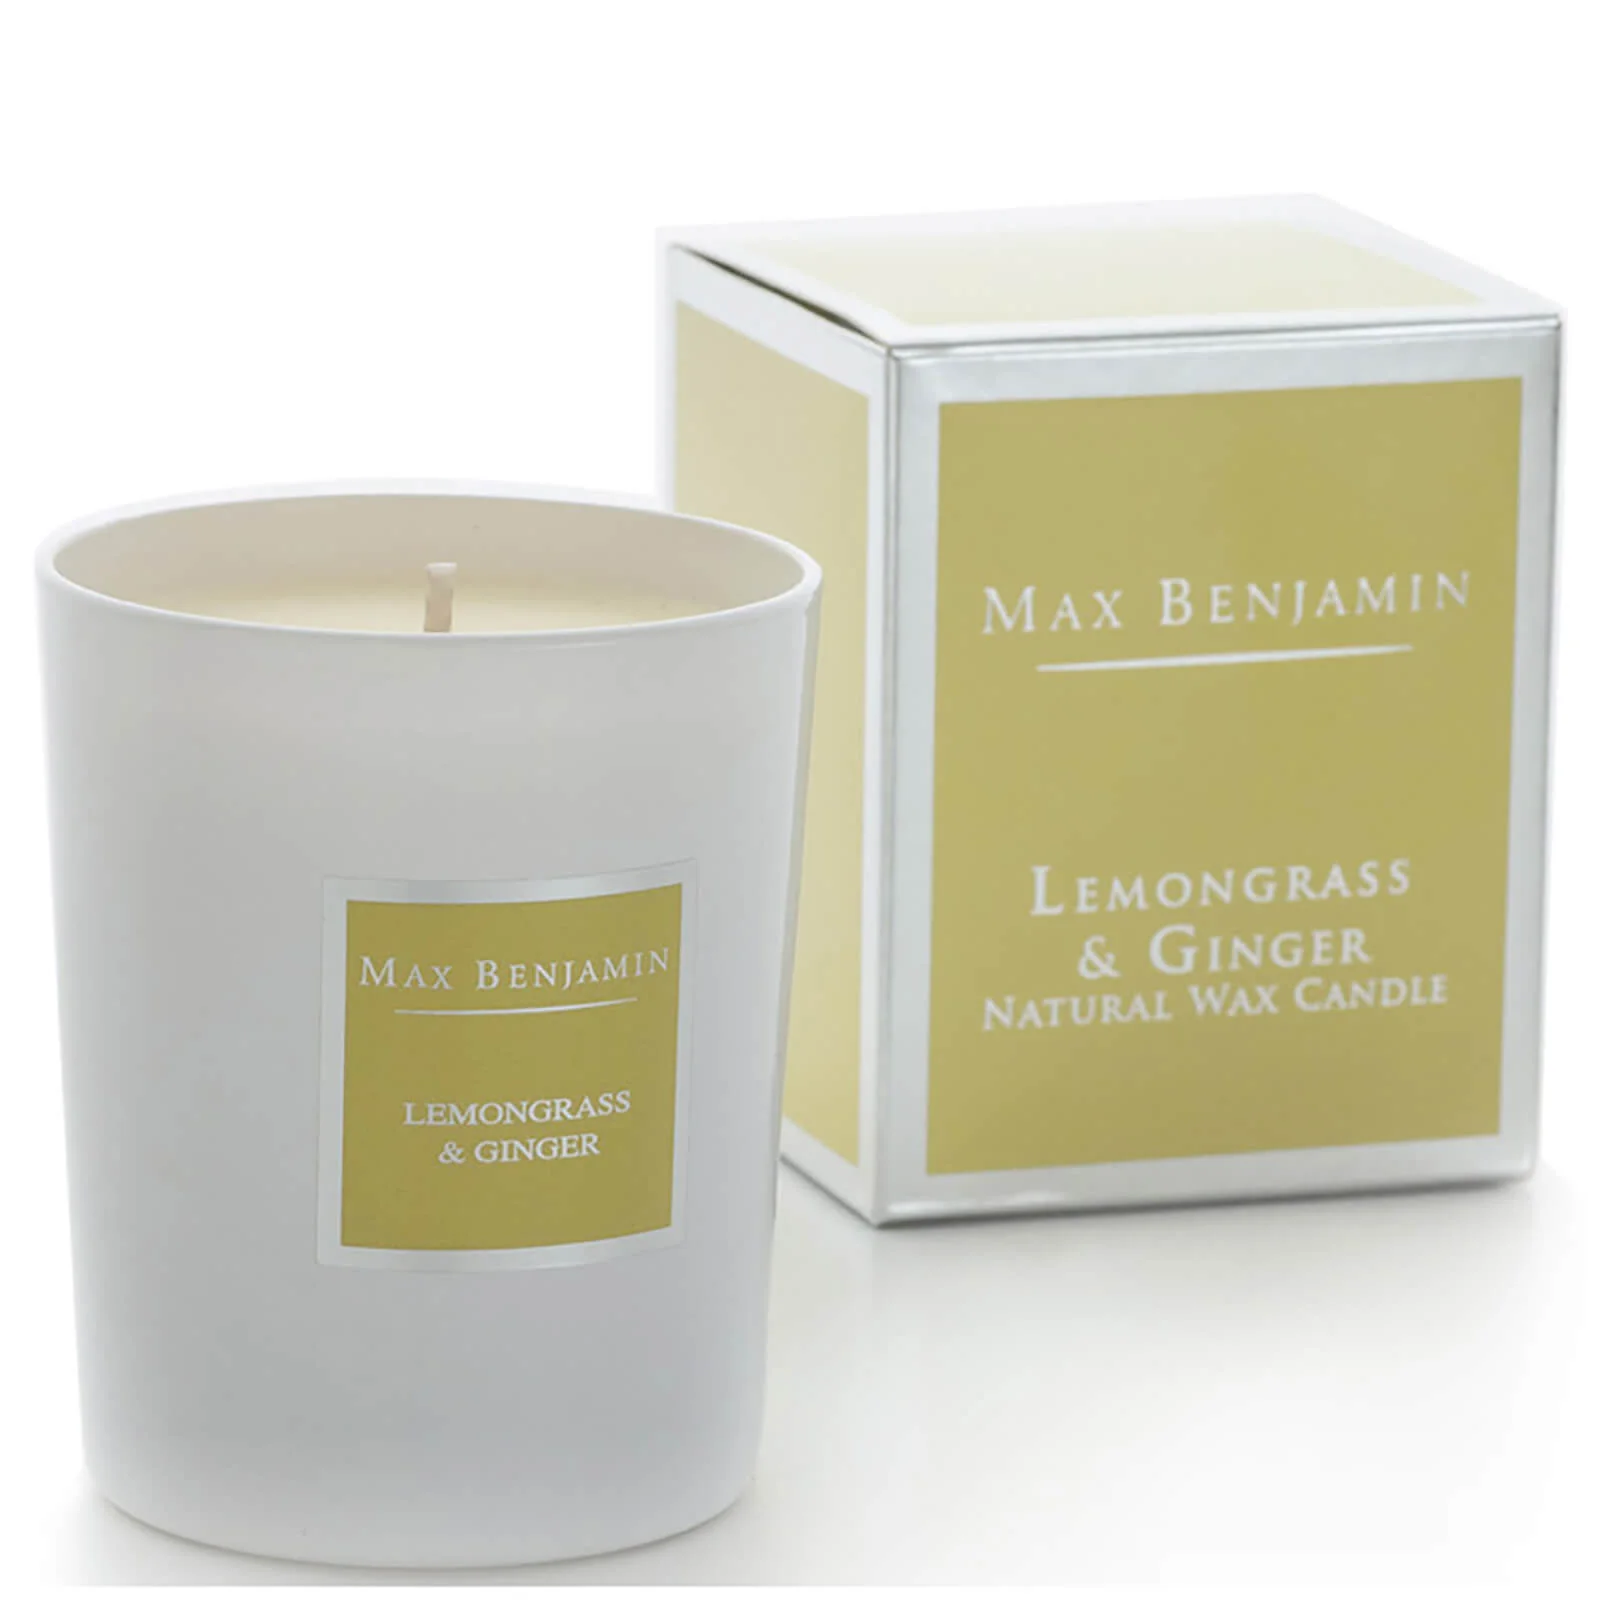 Max Benjamin Scented Glass Candle in Gift Box - Lemongrass and Ginger Image 1